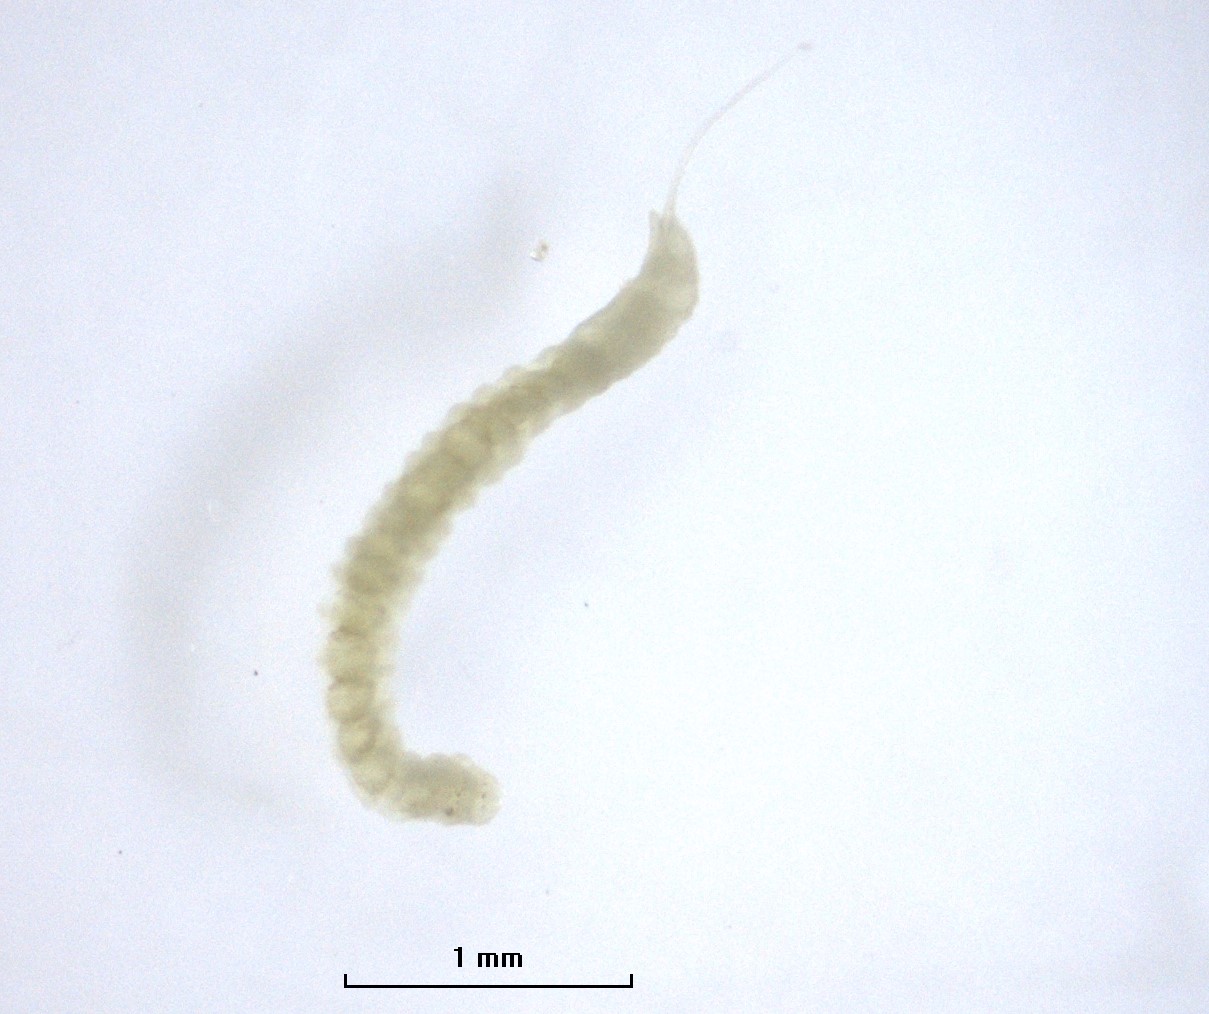 A microscope photo of a whole worm with a long proboscis with two lobes next to it. There is a scale bar labeled 1 mm.